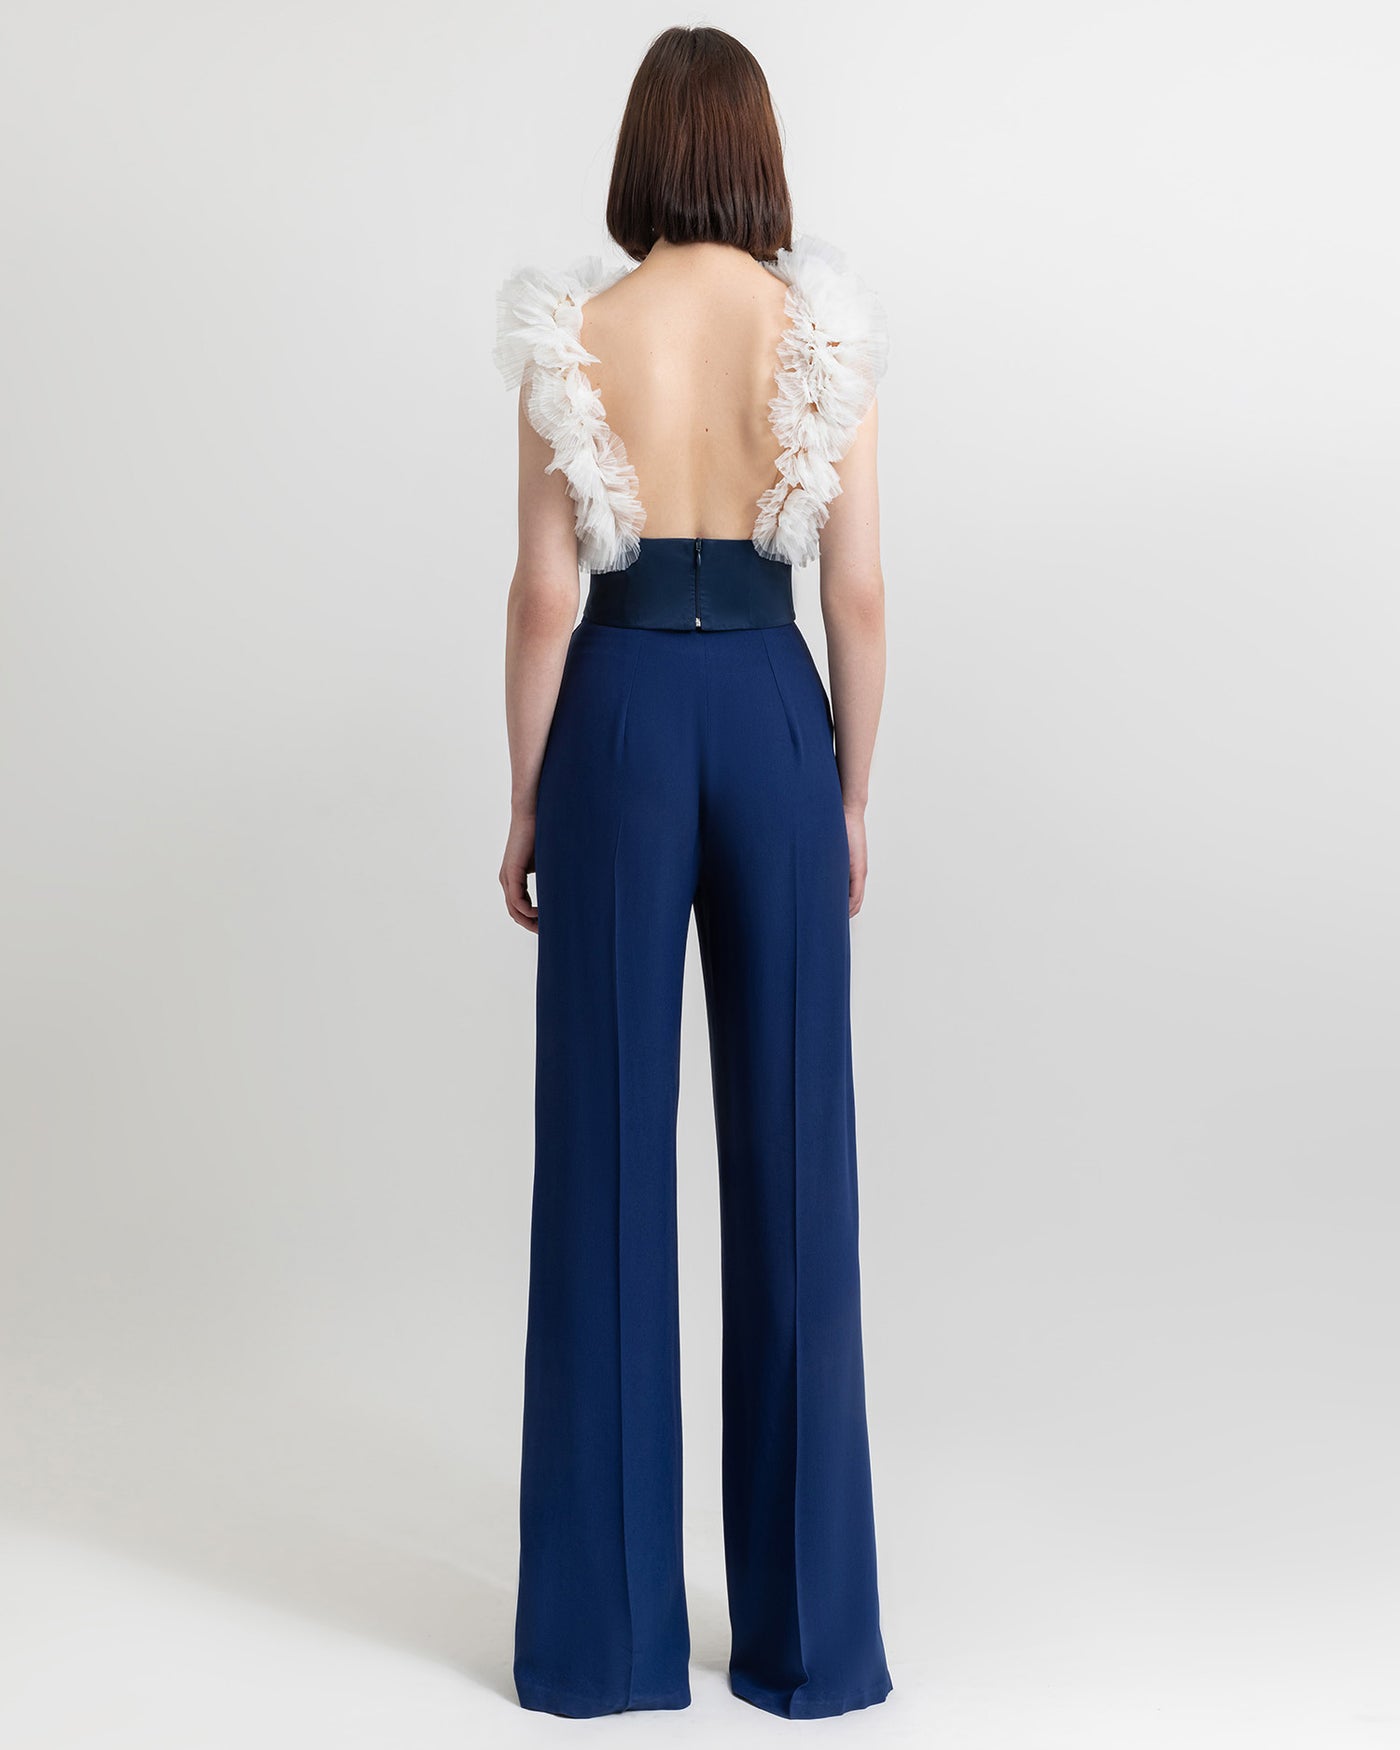 Backless Tulle Top and Straight-Cut Pants